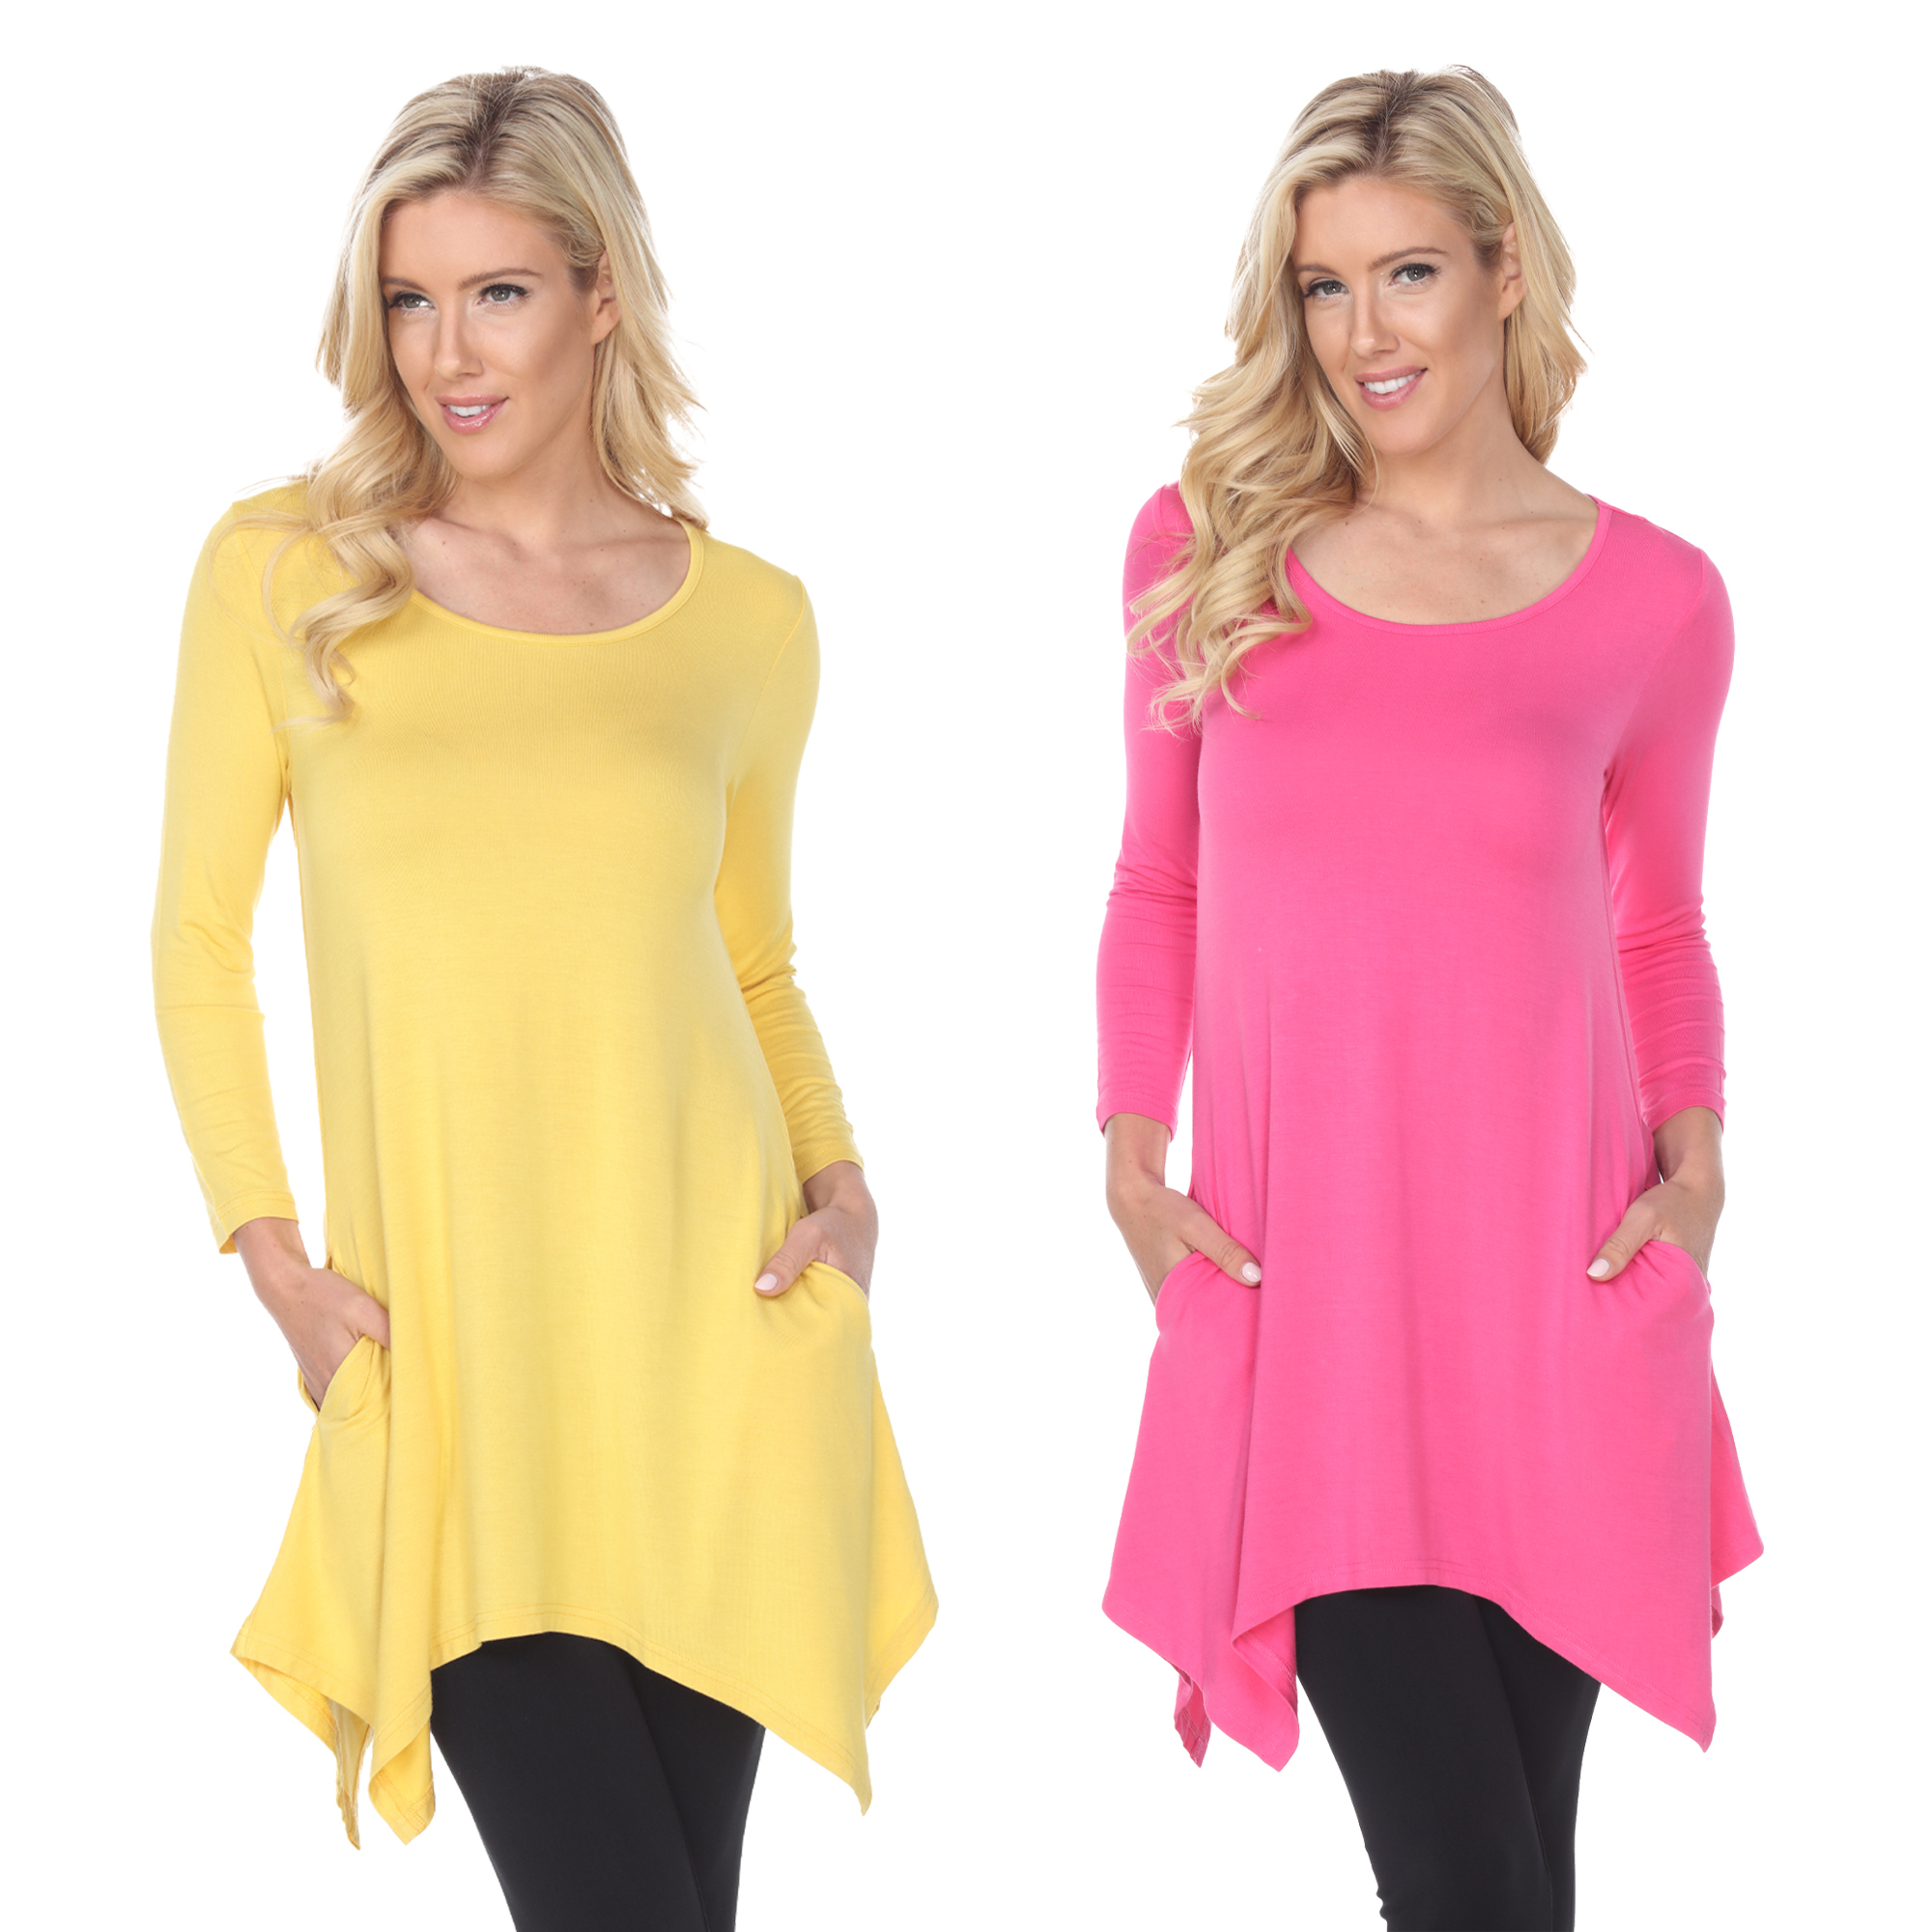 White Mark Women's Pack Of 2 Yellow Tunic Top - Yellow, Coral, 3X